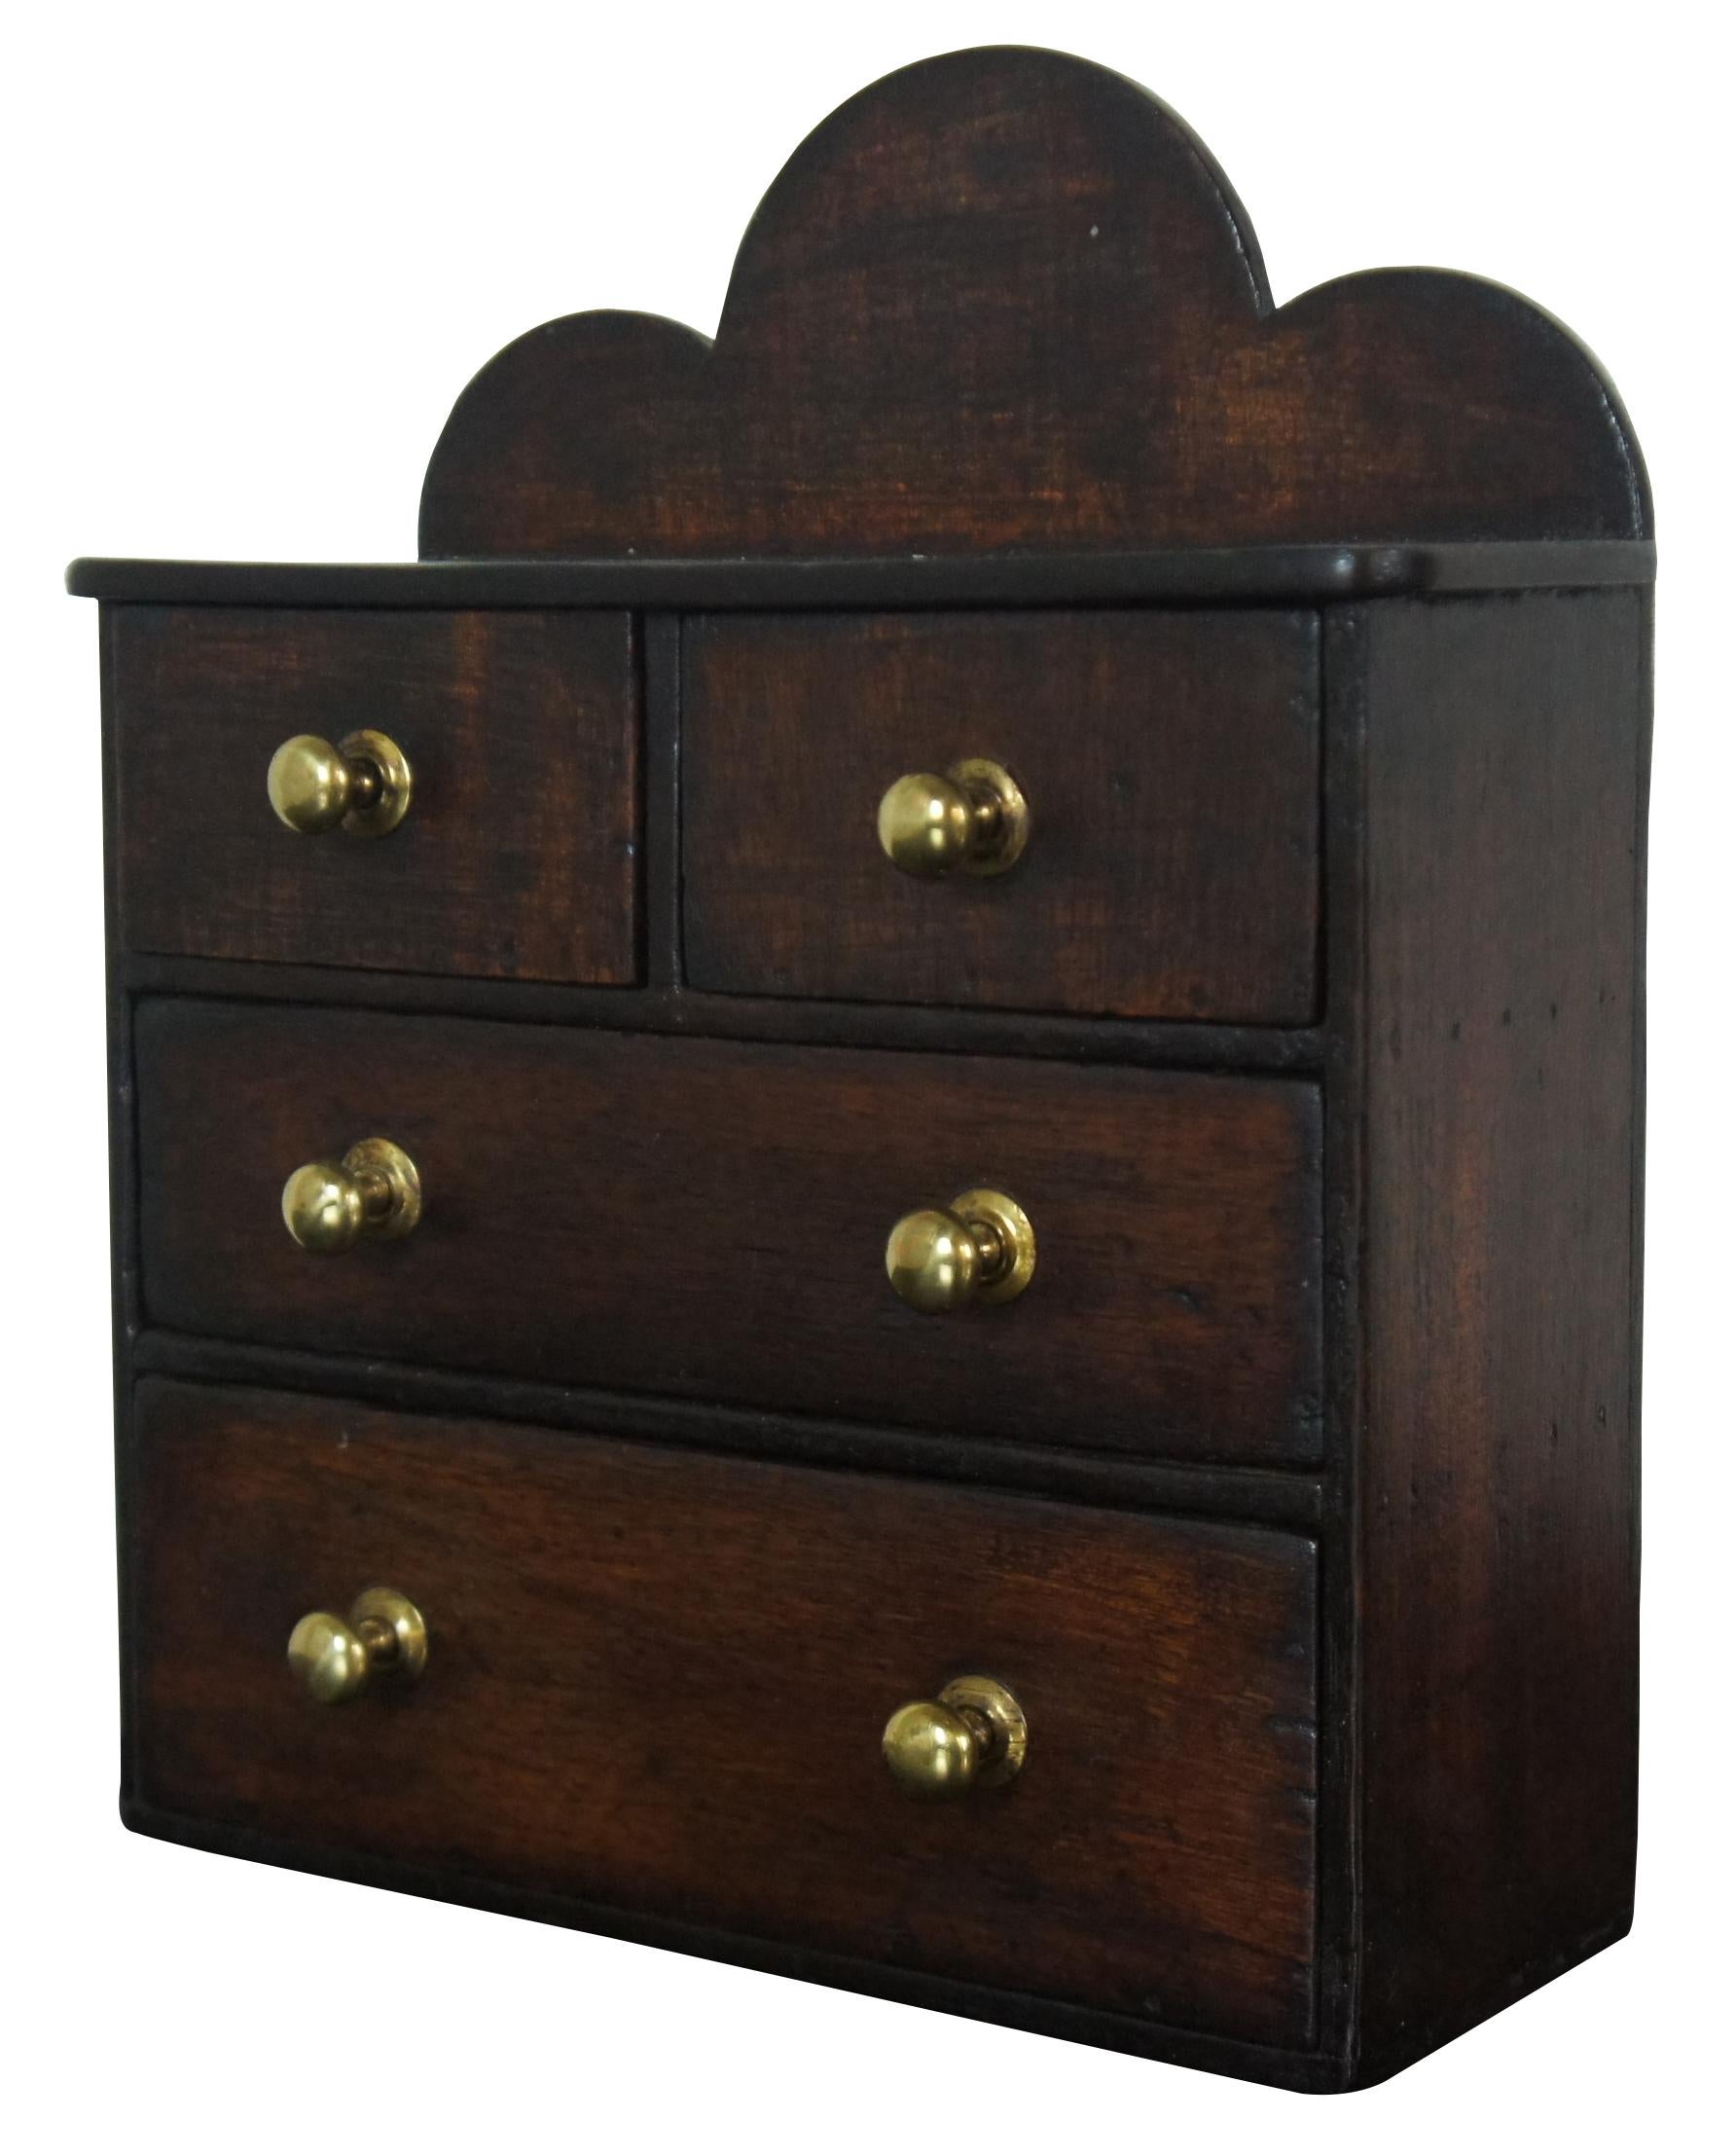 Antique miniature doll sized / salesman sample chest of drawers with brass knobs and a scalloped backsplash.
